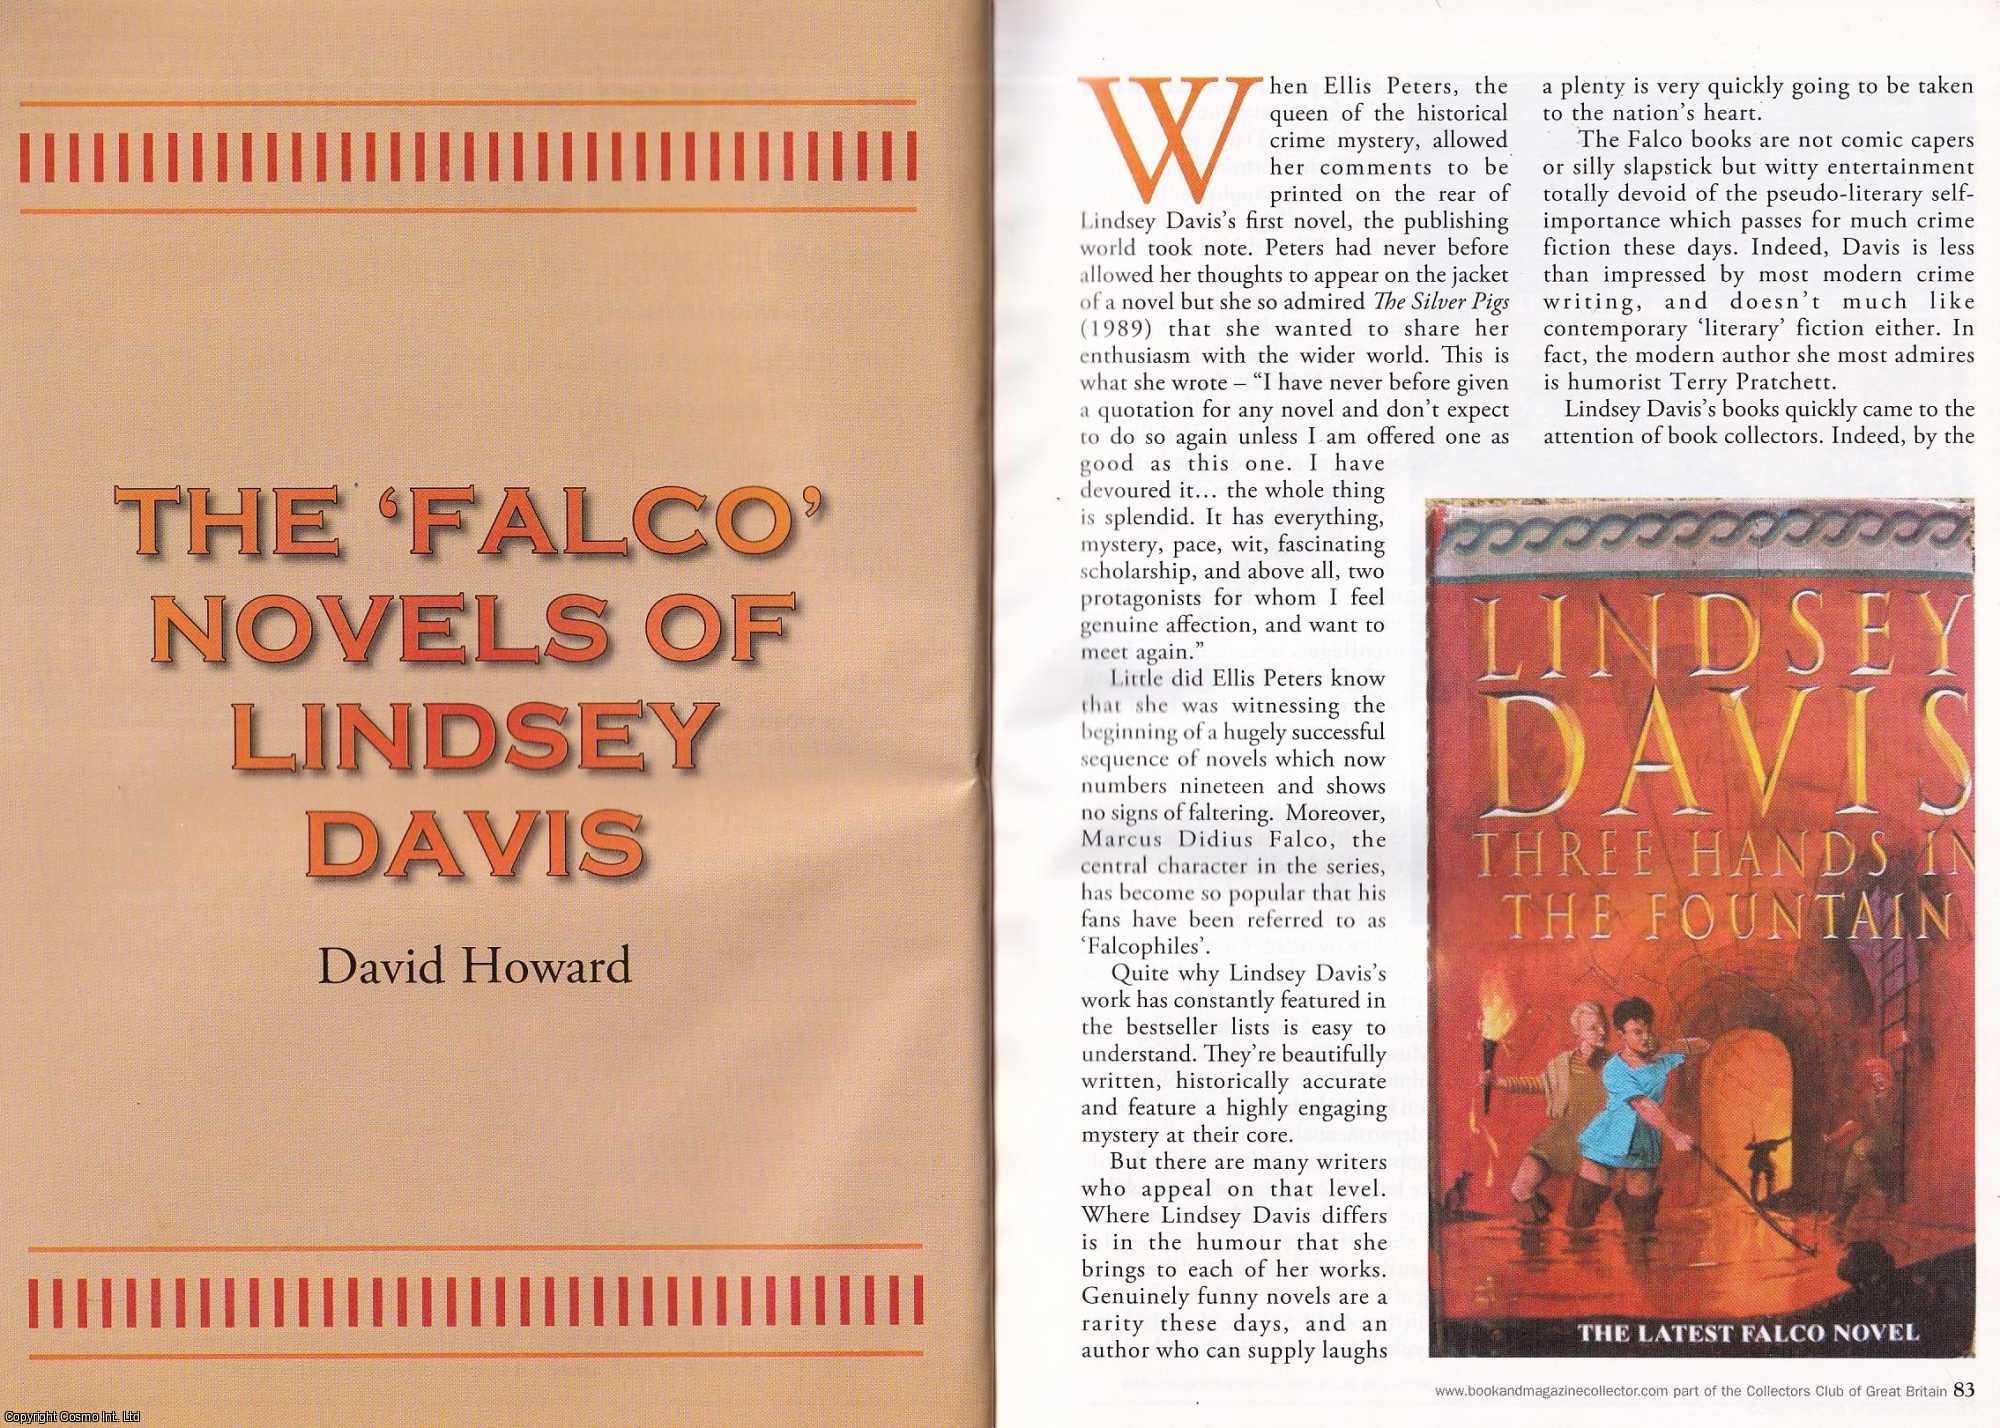 David Howard - The Falco Novels of Lindsey Davis. This is an original article separated from an issue of The Book & Magazine Collector publication, 2009.